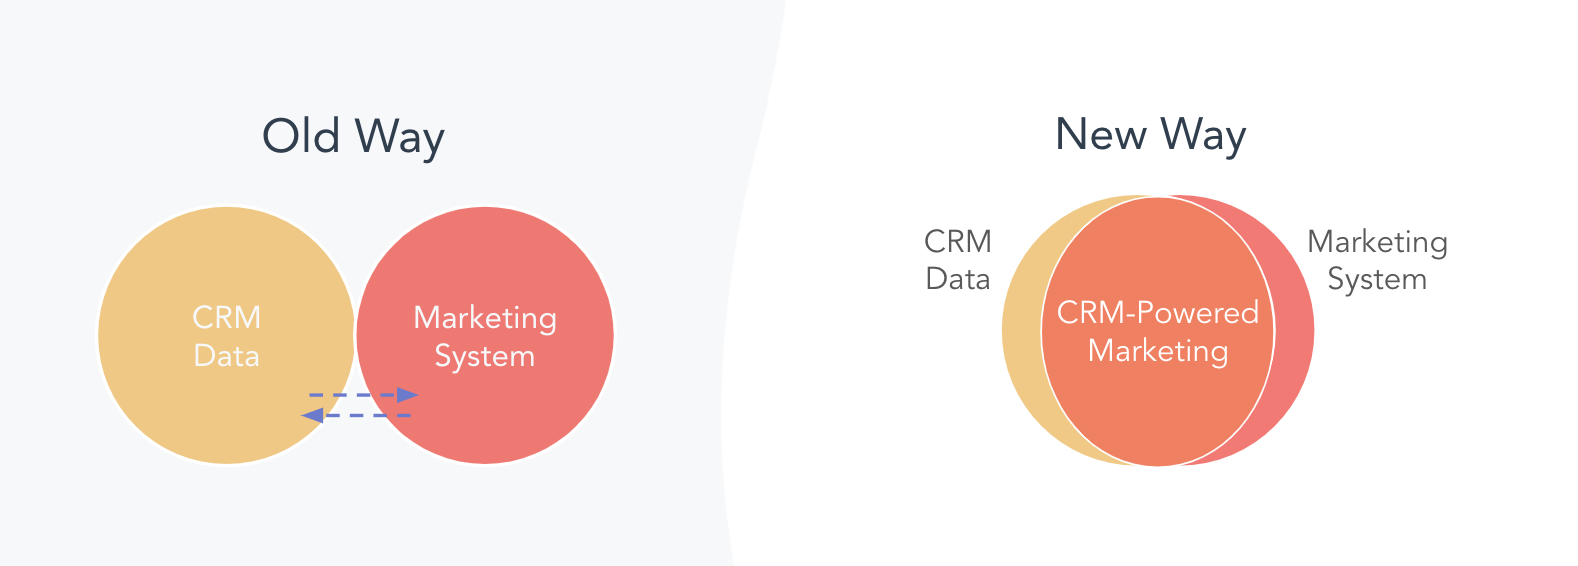 Graphic showing the new way is combining CRM data and your marketing system to obtain better results